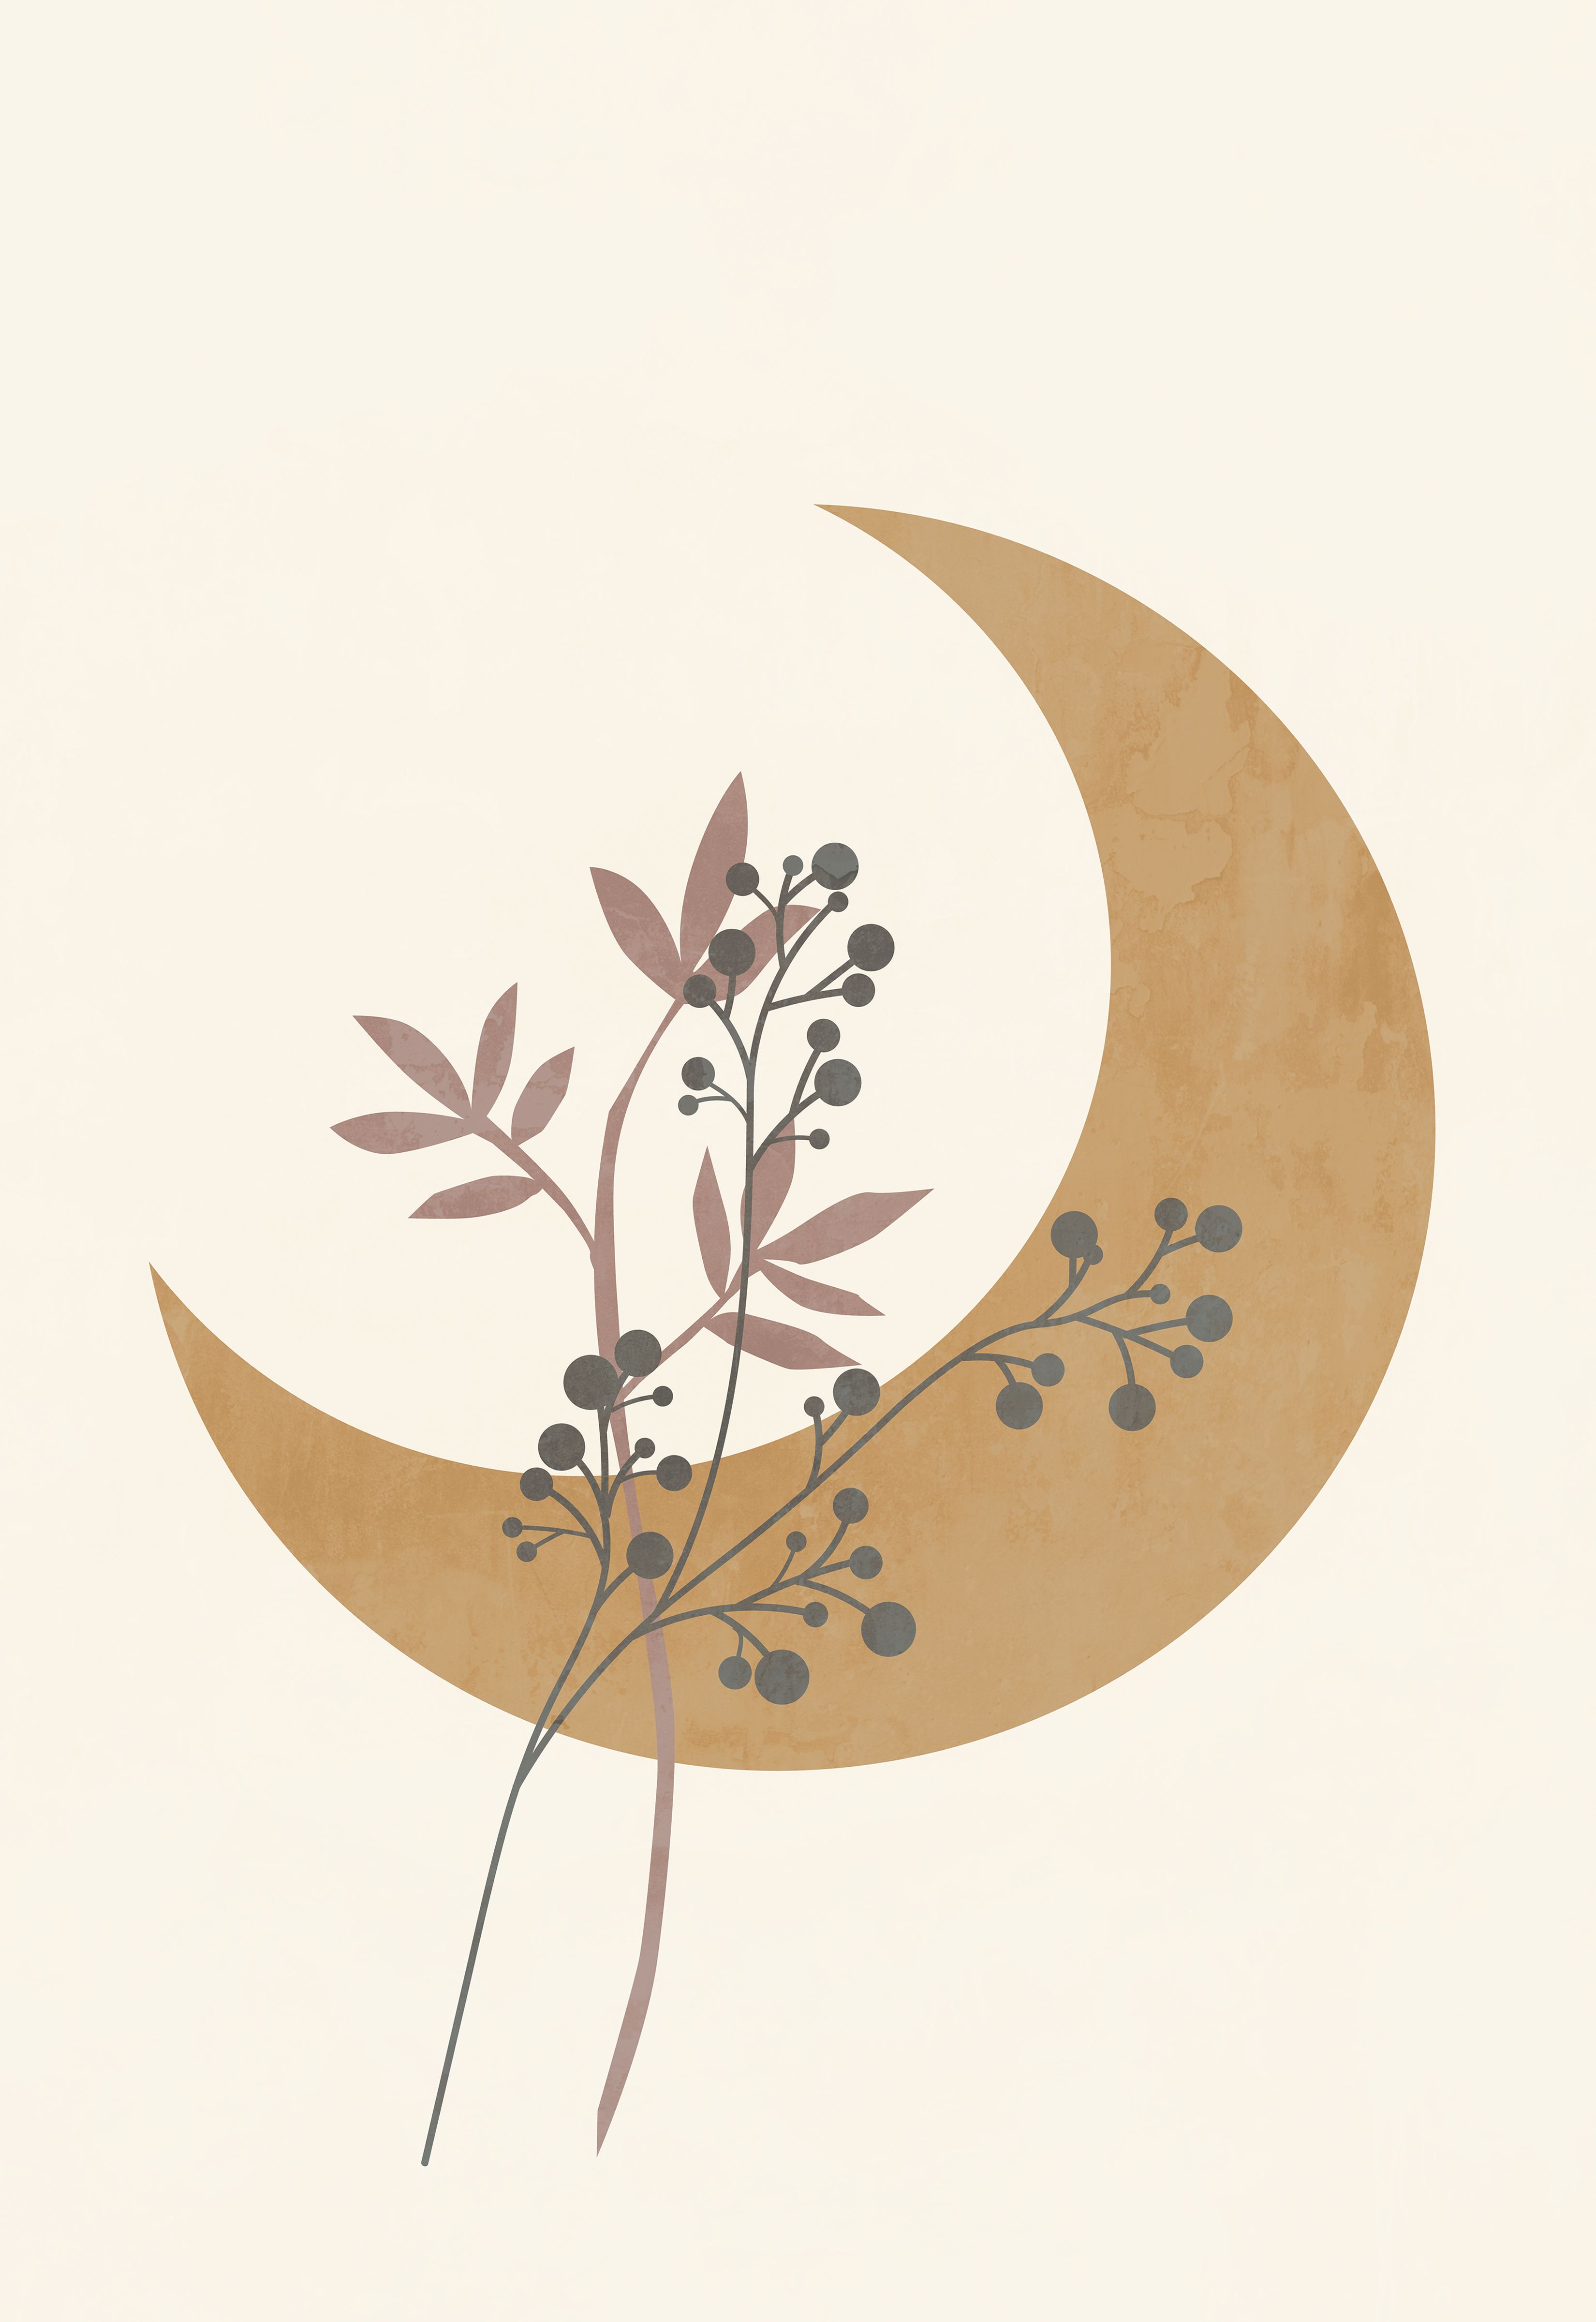 A moon with some plants on it - Boho